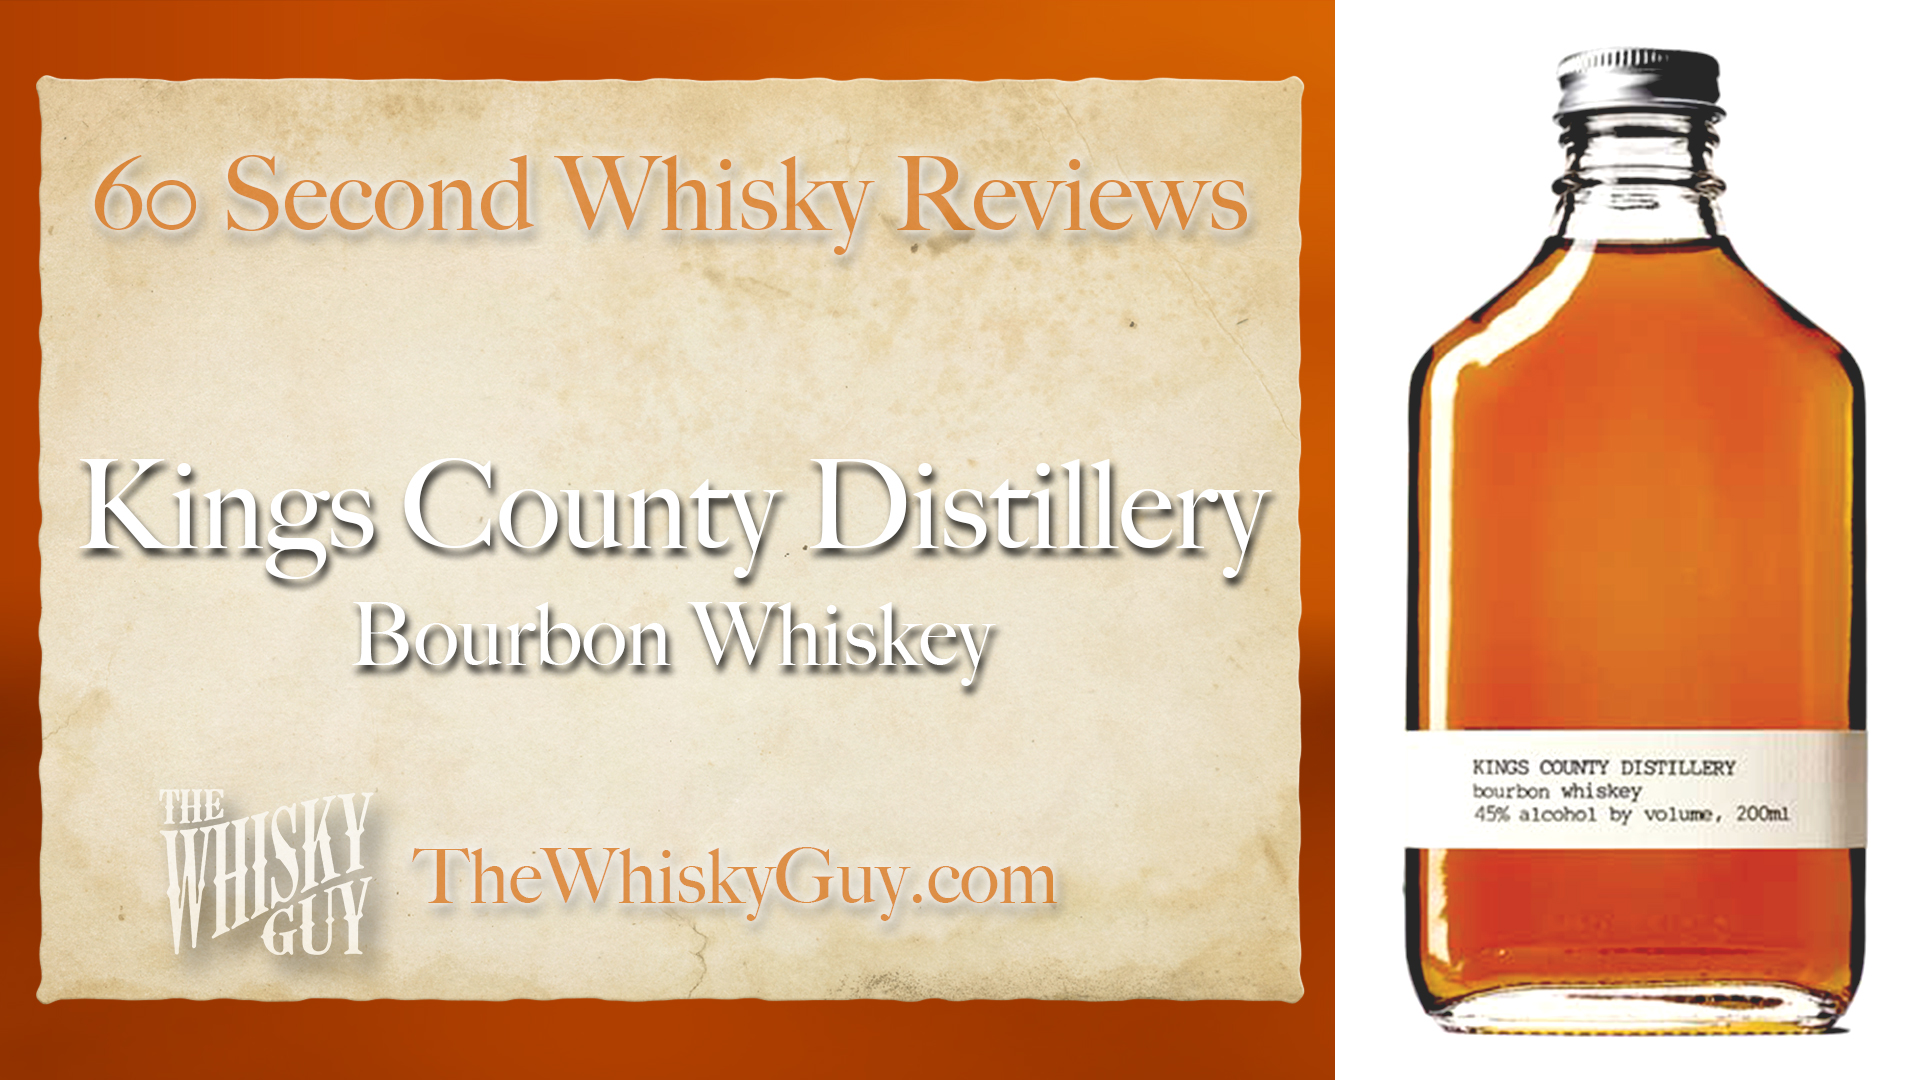 Does Kings County Distillery Bourbon Whiskey belong in your liquor cabinet? Is it worth the price at the bar? Give The Whisky Guy 60 seconds and find out! In just 60 seconds, The Whisky Guy reviews Irish Whiskey, Scotch Whisky, Single Malt, Canadian Whisky, Bourbon Whiskey, Japanese Whisky and other whiskies from around the world. Find more at TheWhiskyGuy.com. All original content © Ari Shapiro - TheWhiskyGuy.com